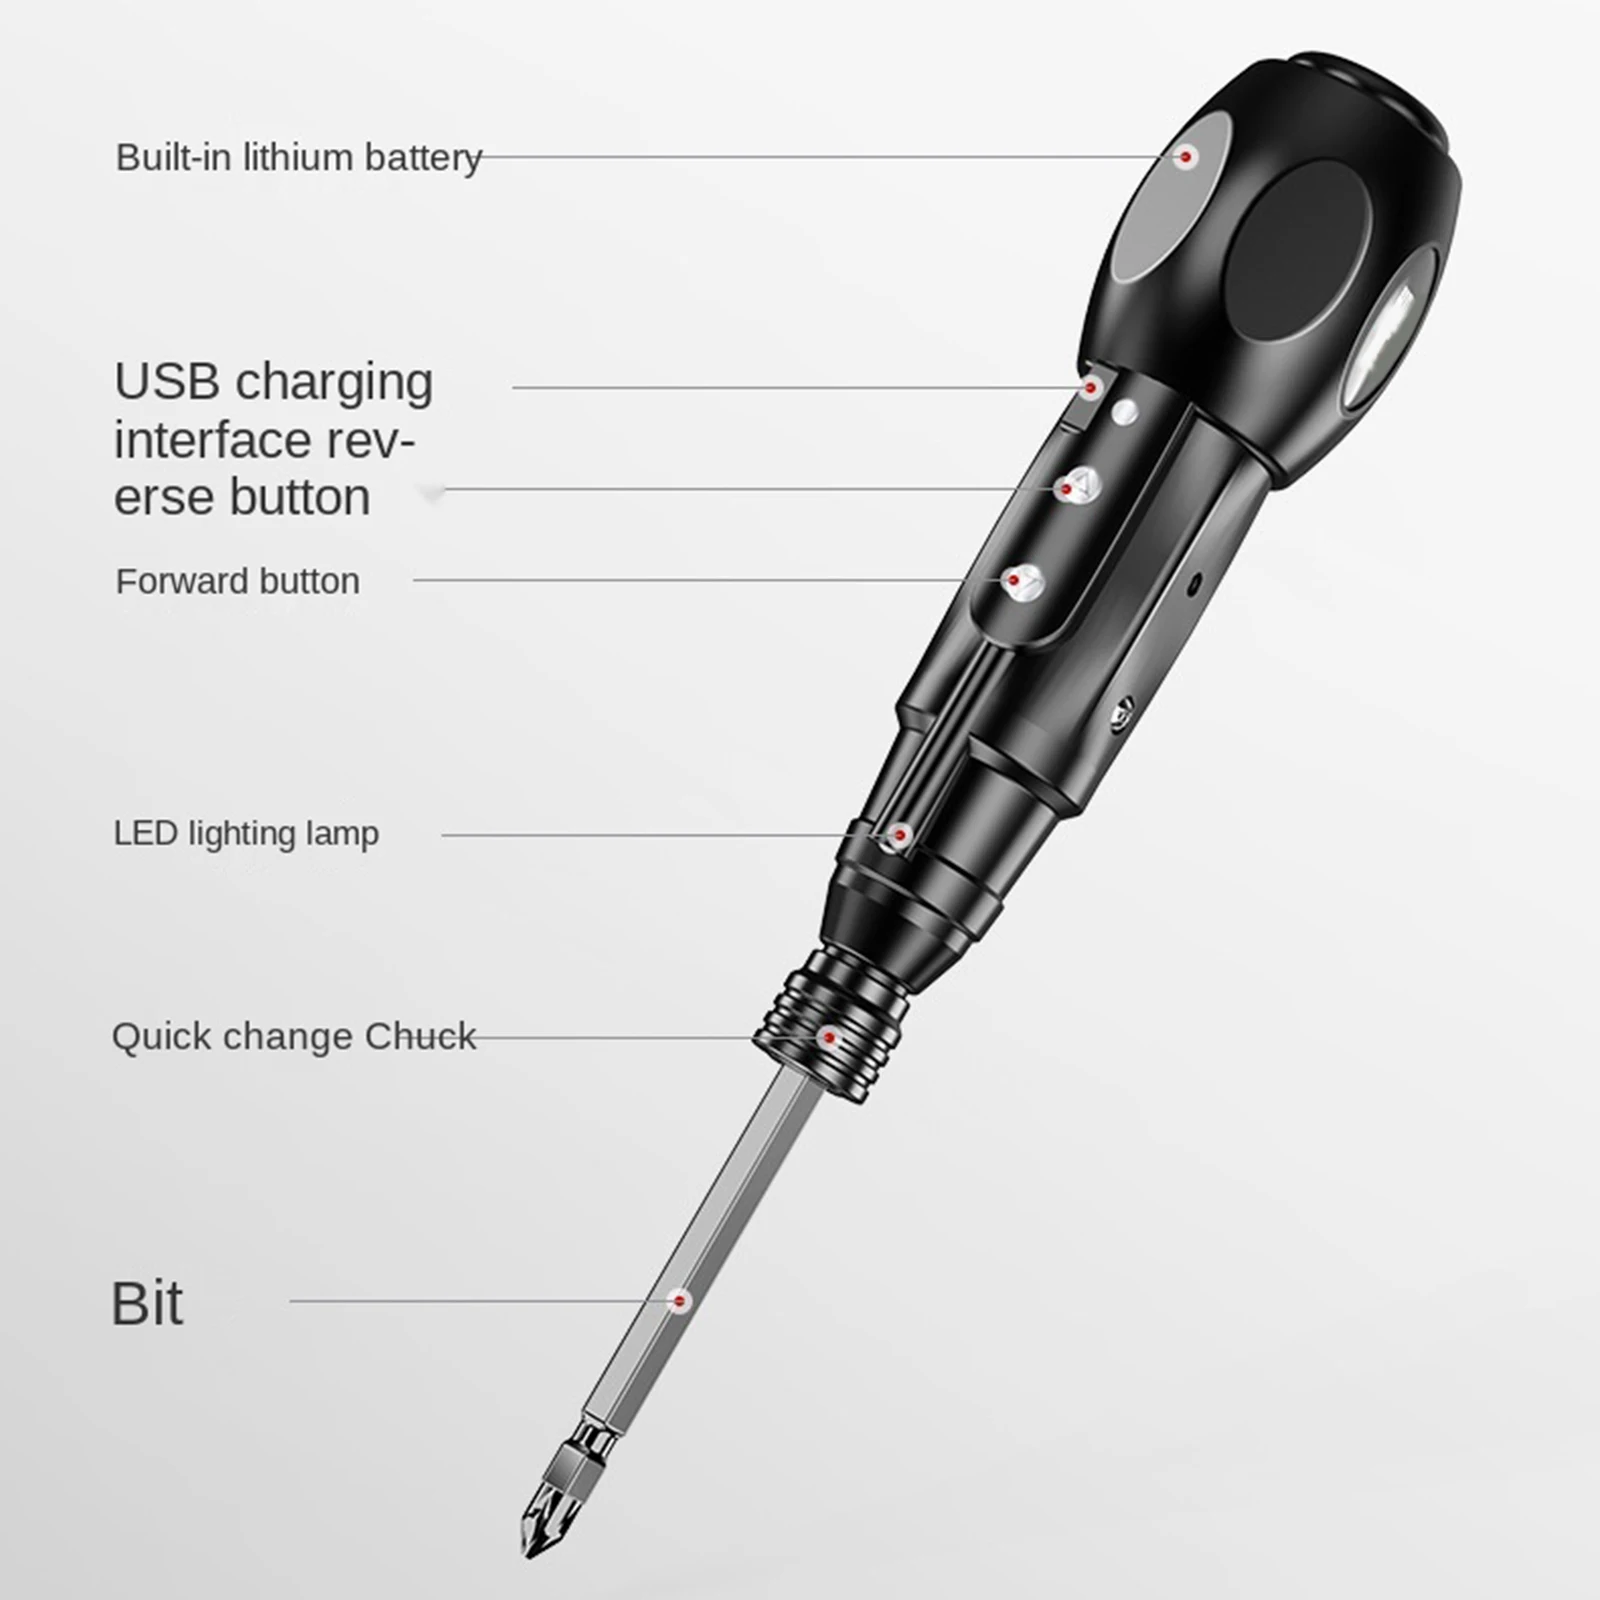 Wireless Electric Screwdriver Repair PC Tools with LED Light Handheld Drill Screwdriver for DIY Project